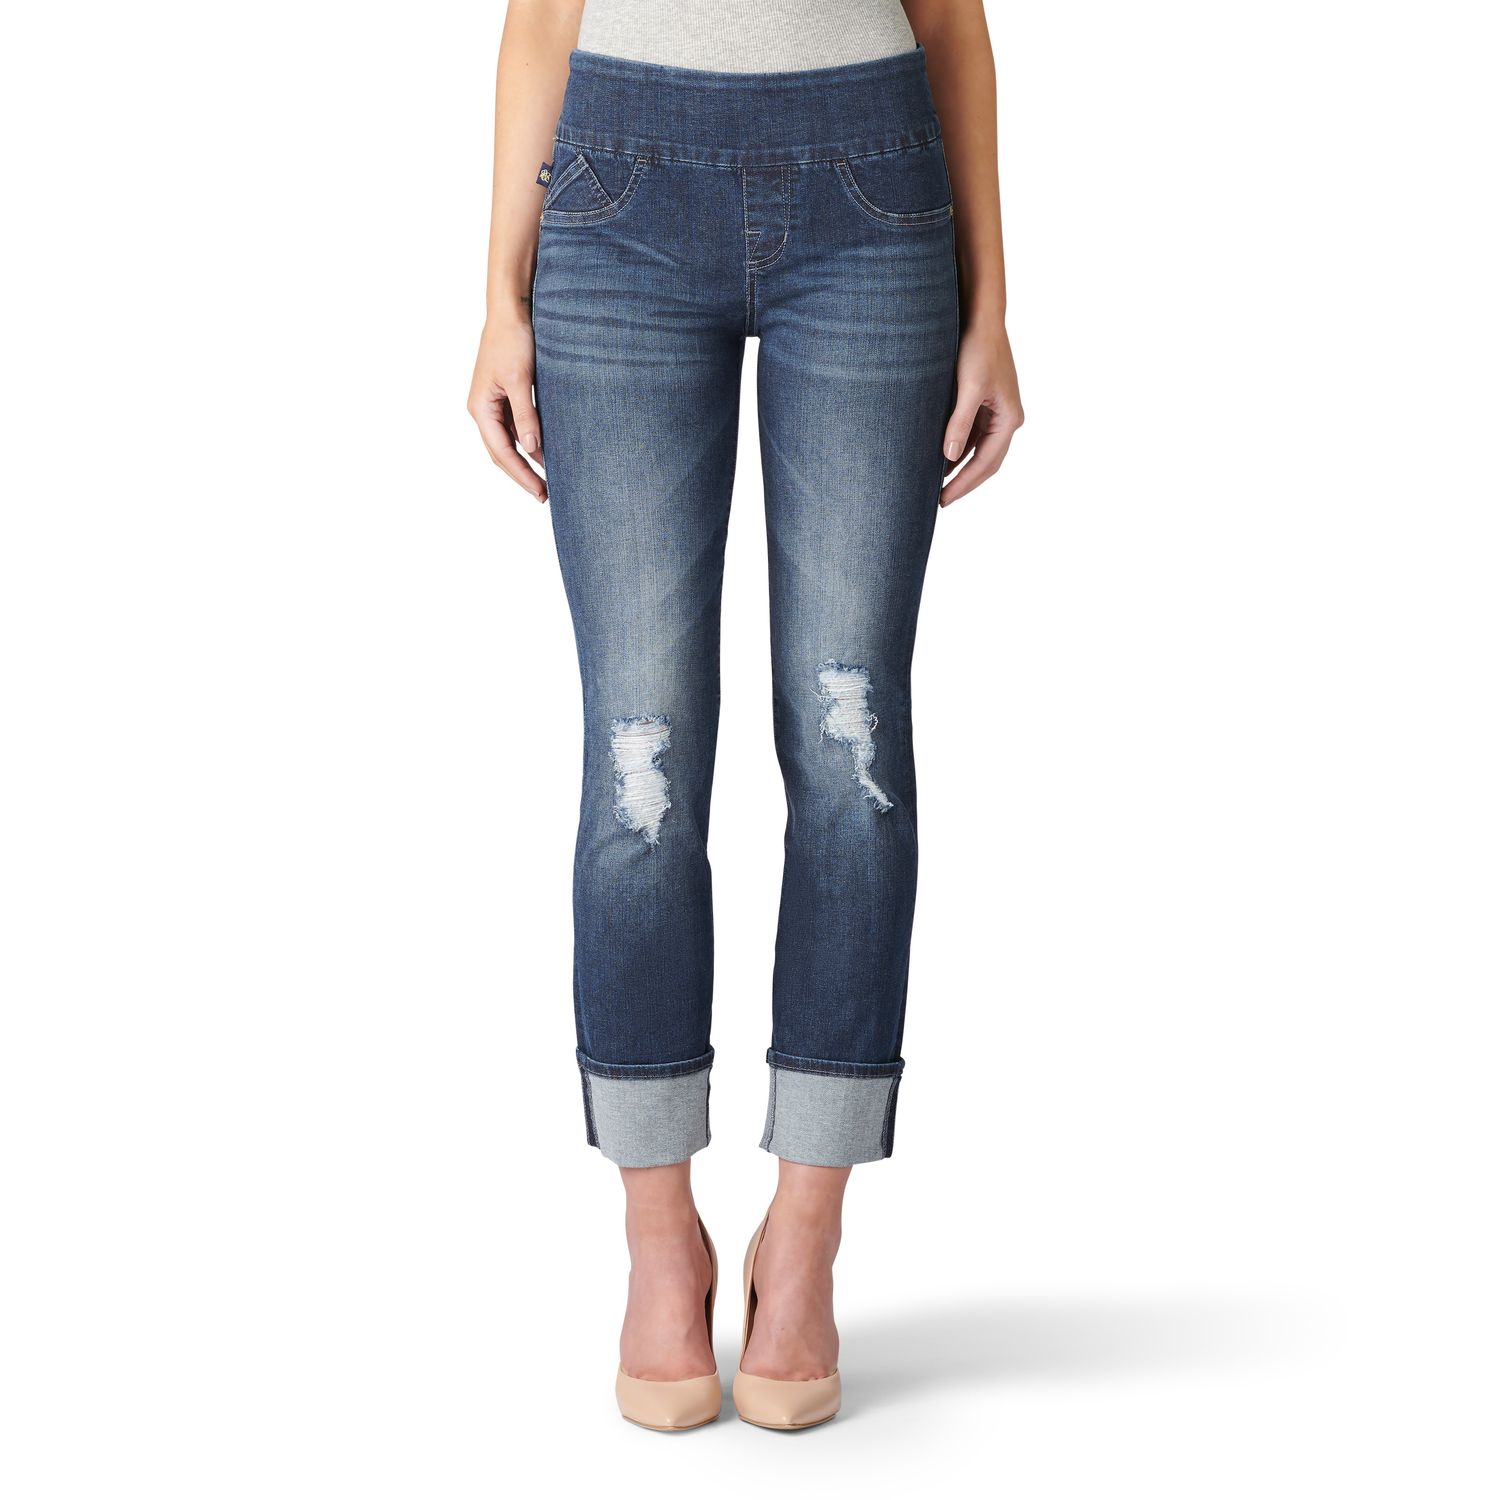 Fever Midrise Pull-On Straight Leg Jeans